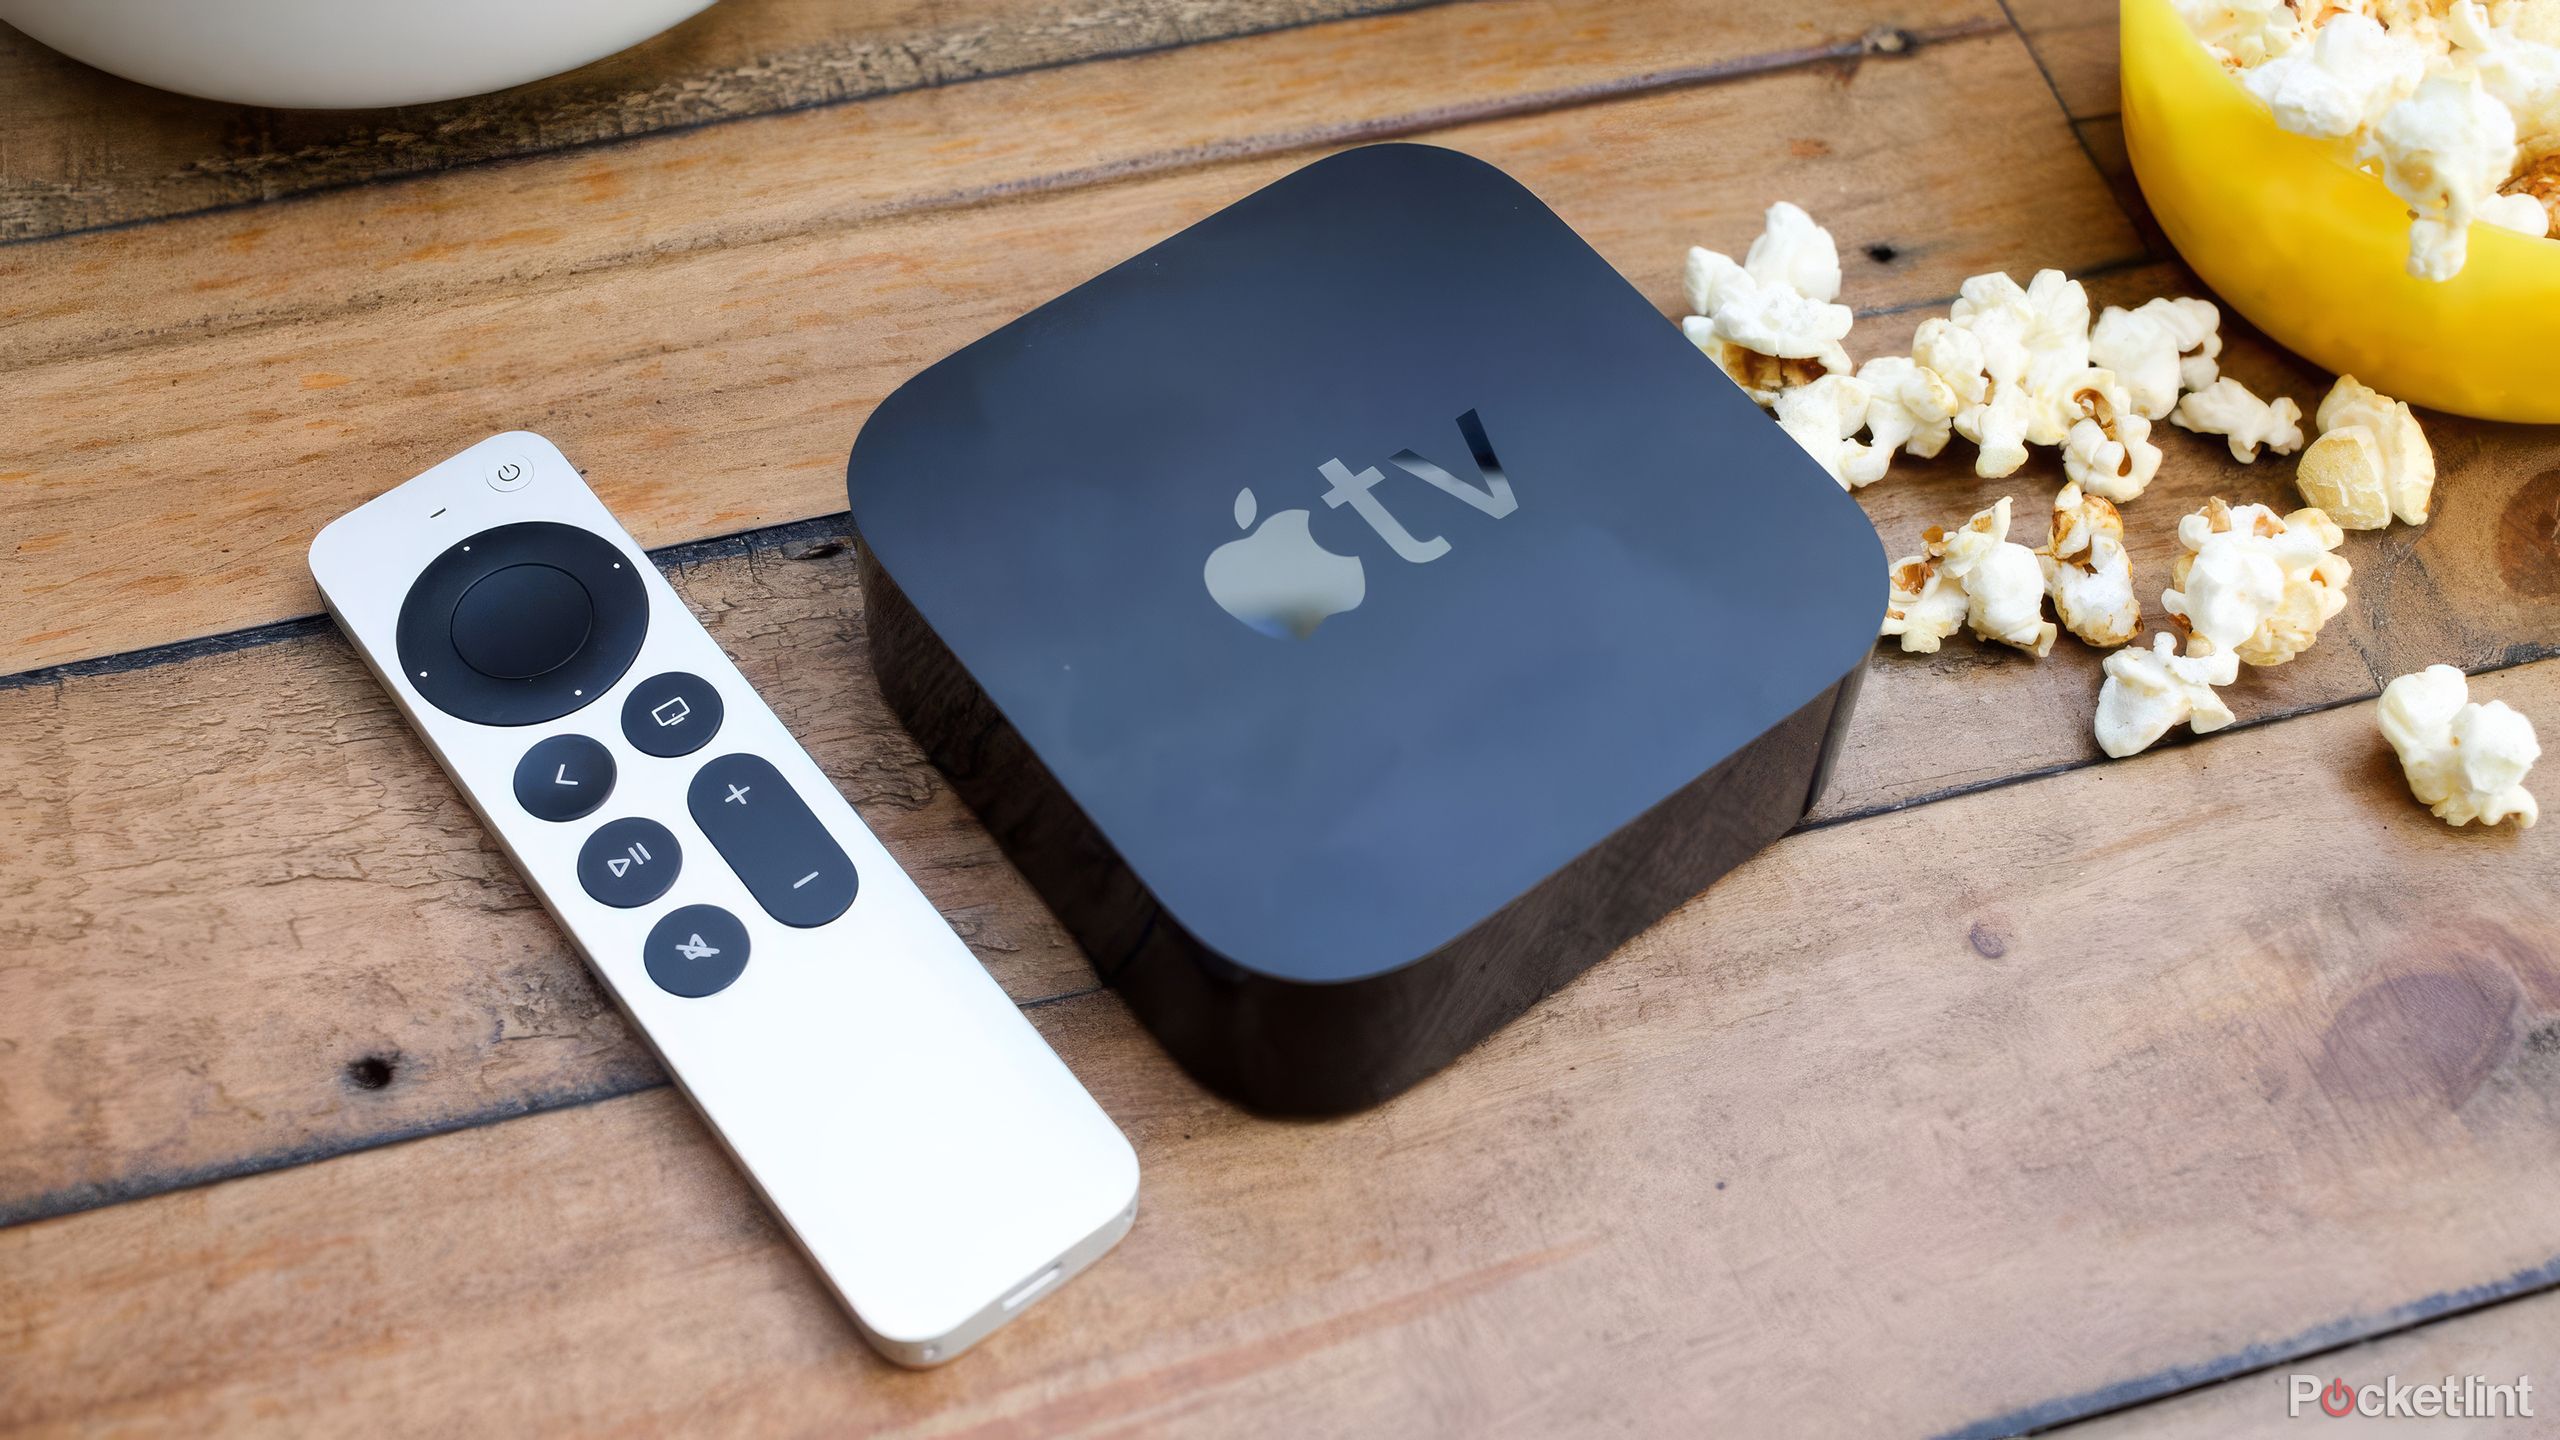 An Apple TV remote and box sit on a wood table next to popcorn.